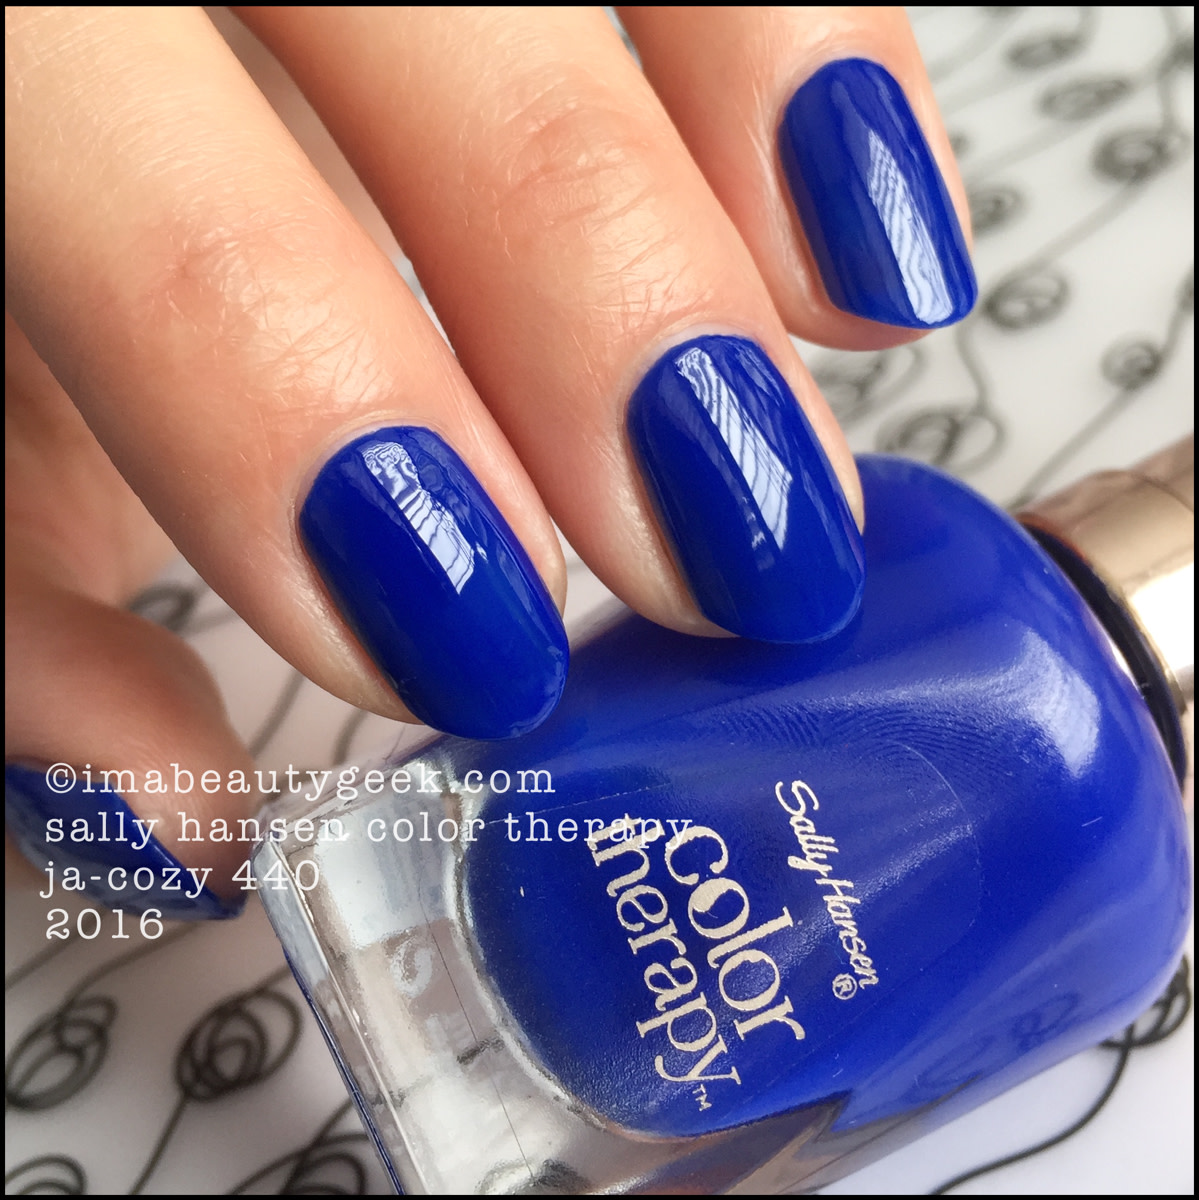 Sally Hansen Color Therapy JaCozy 440_Sally Hansen Color Therapy Review Swatches